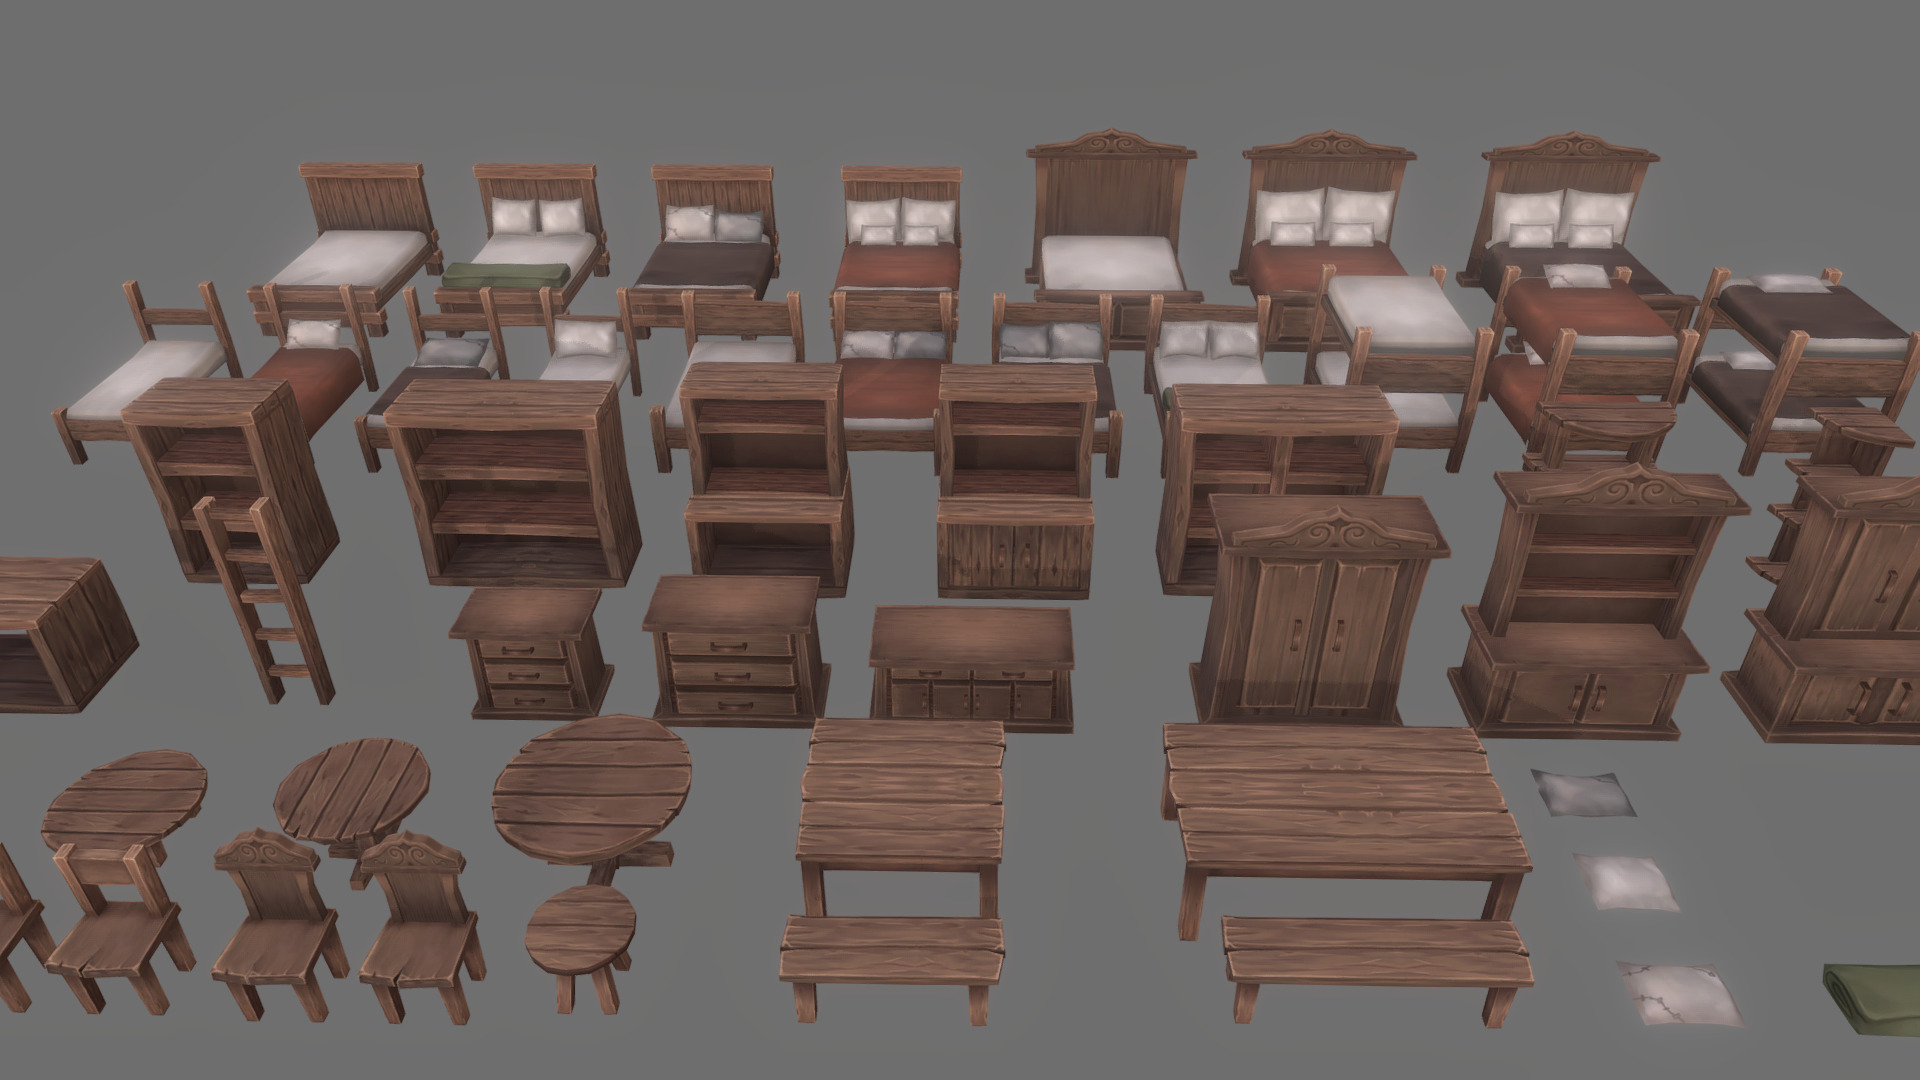 3D model Furniture Pack – 01 - This is a 3D model of the Furniture Pack - 01. The 3D model is about a room with a large group of chairs and tables.